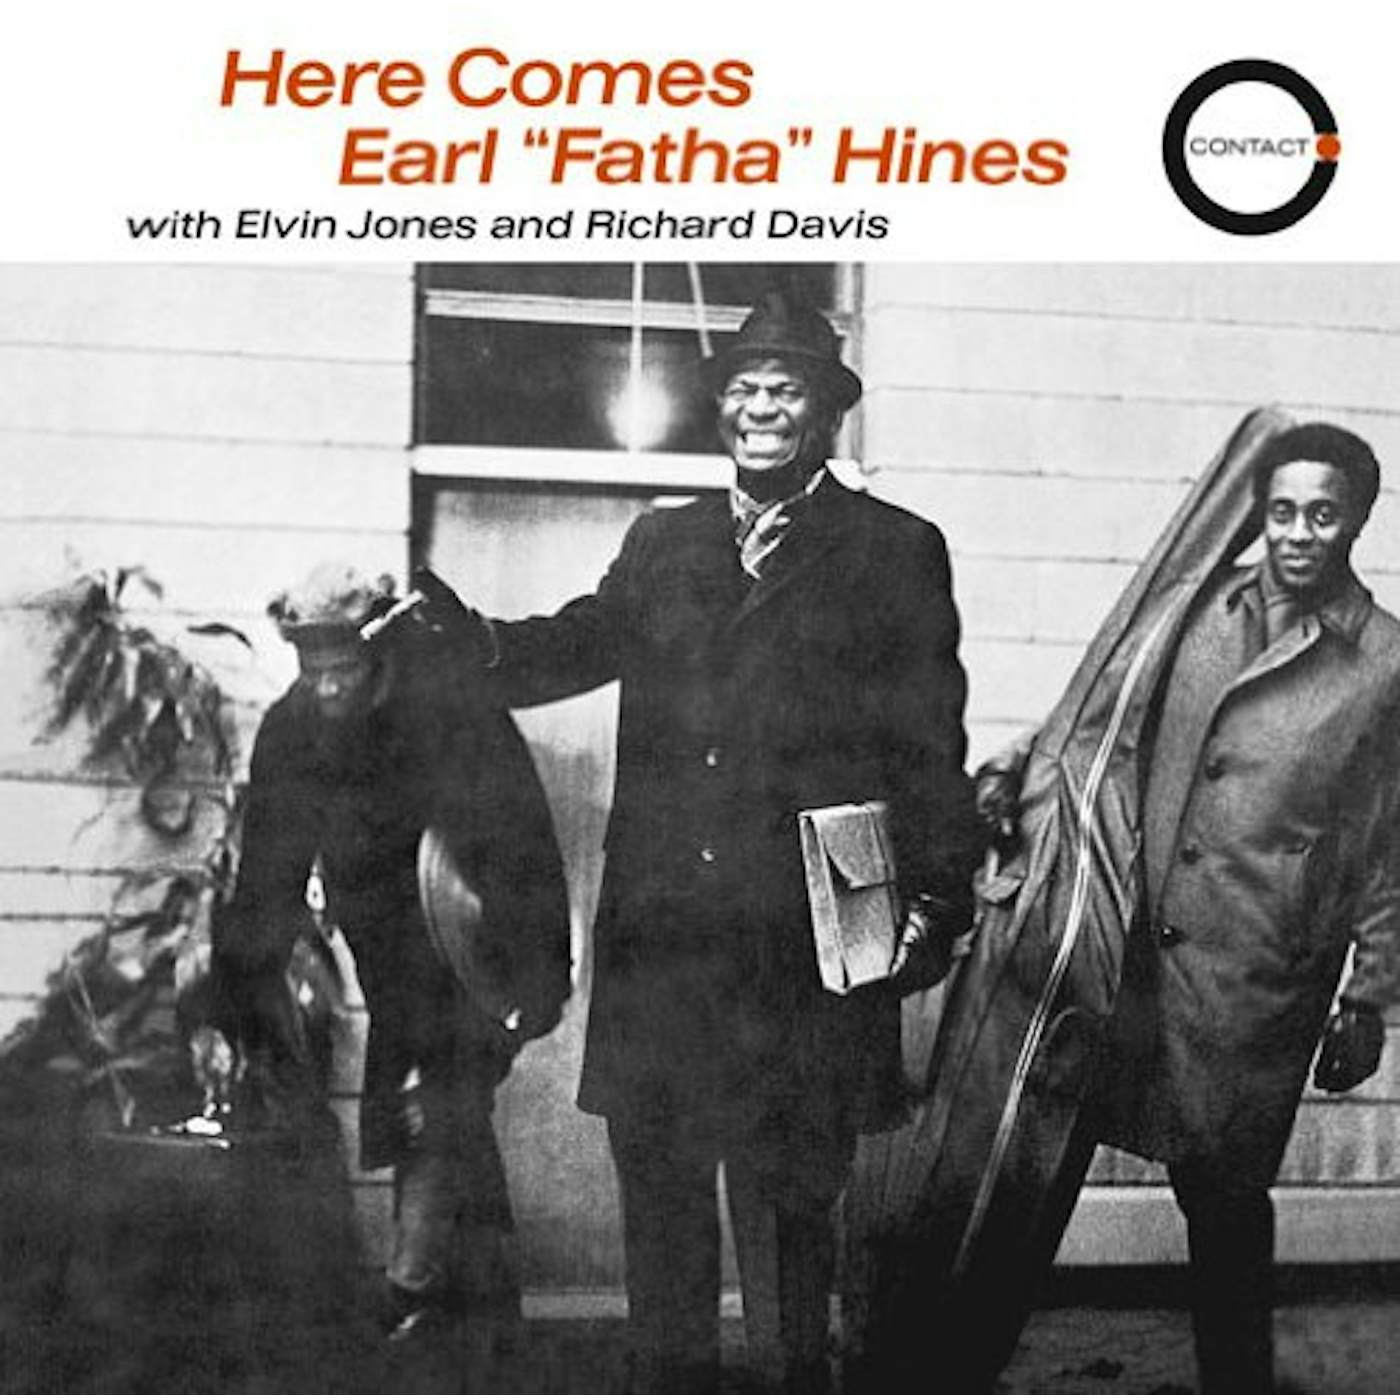 Earl Hines HERE COMES CD